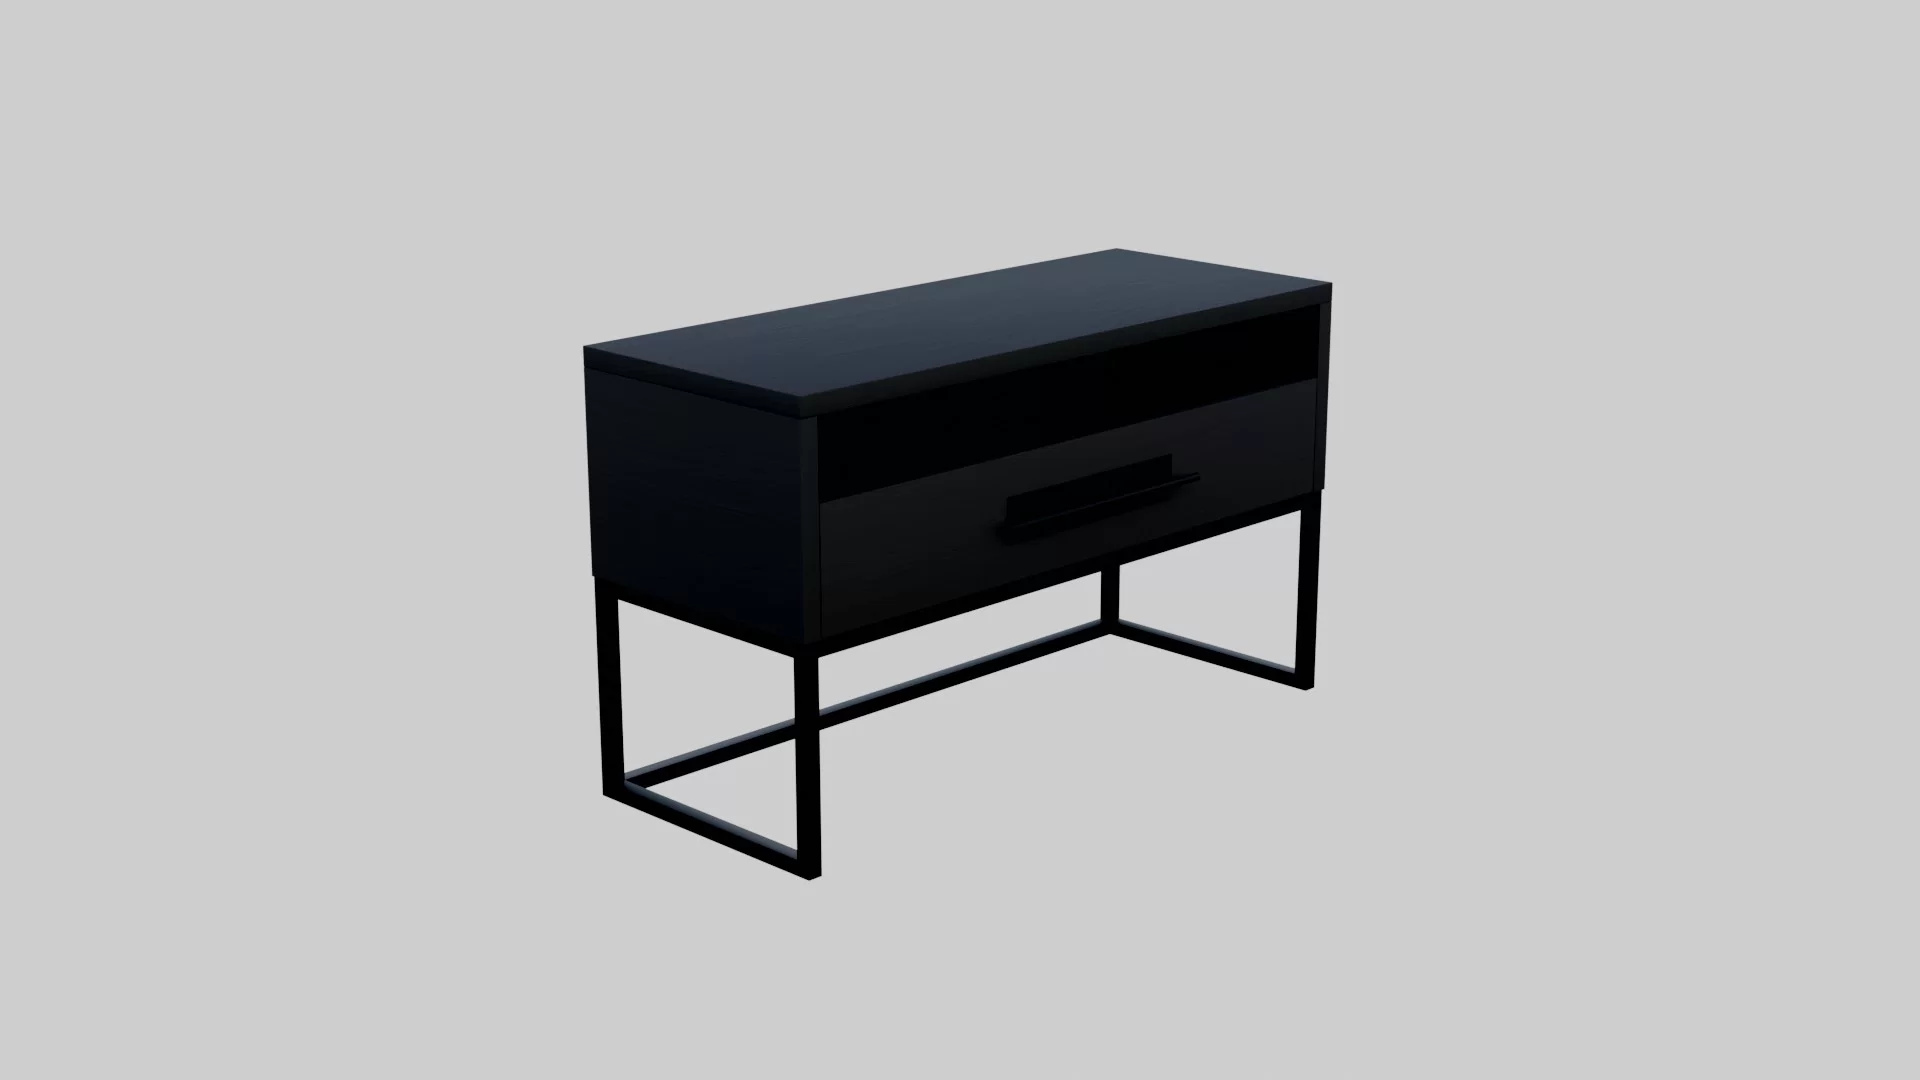 Low-poly 3D Model of Furniture